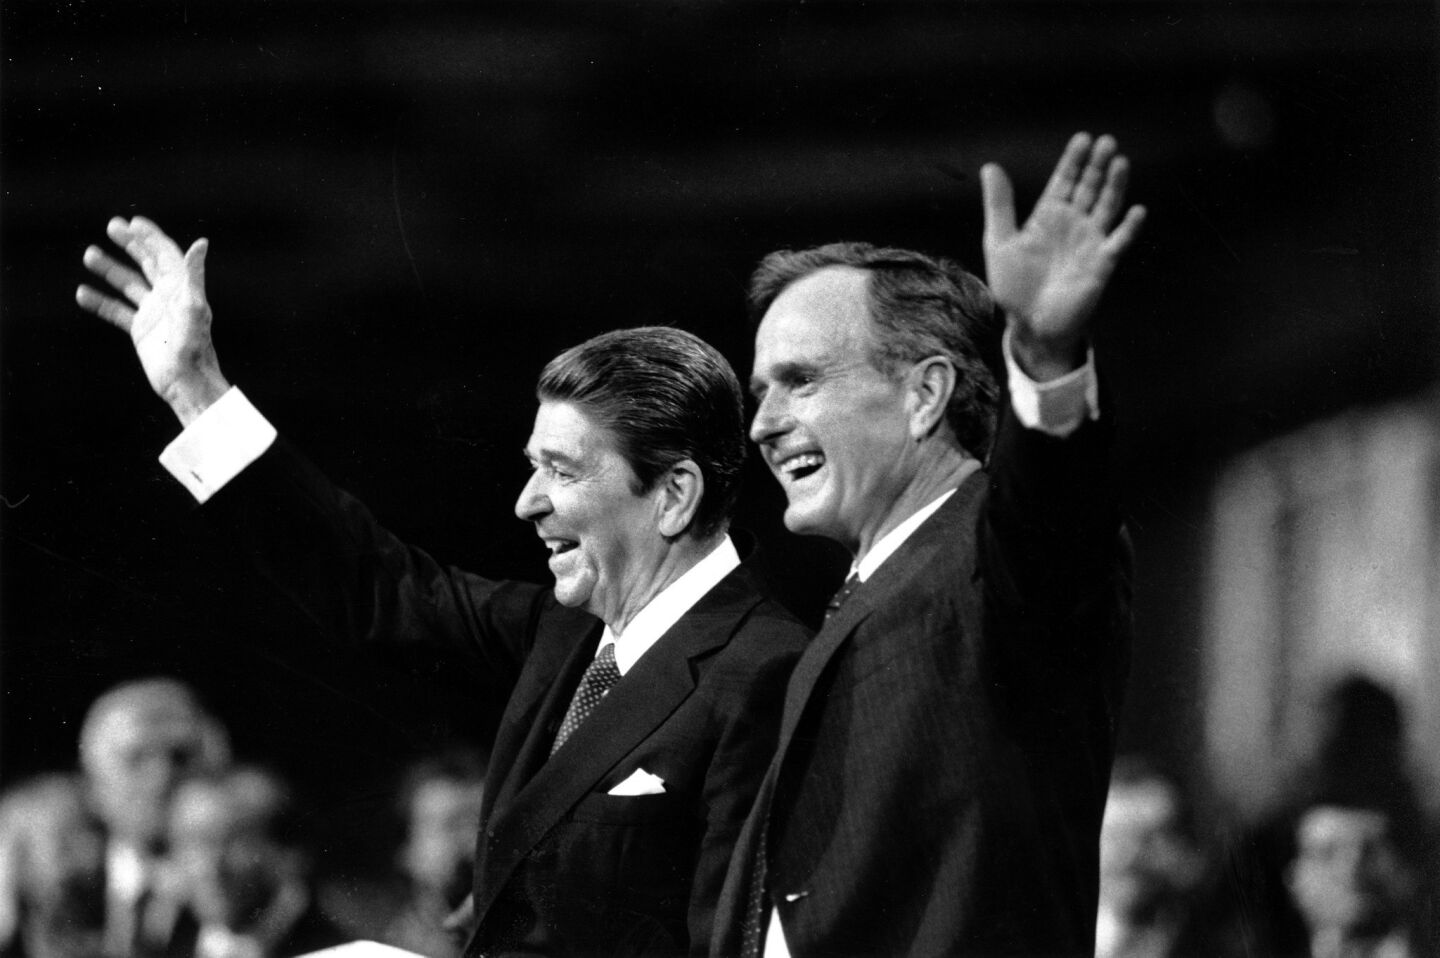 President Reagan, left, and Vice President George H.W. Bush at the Republican National Convention in Dallas on Aug. 24, 1984.